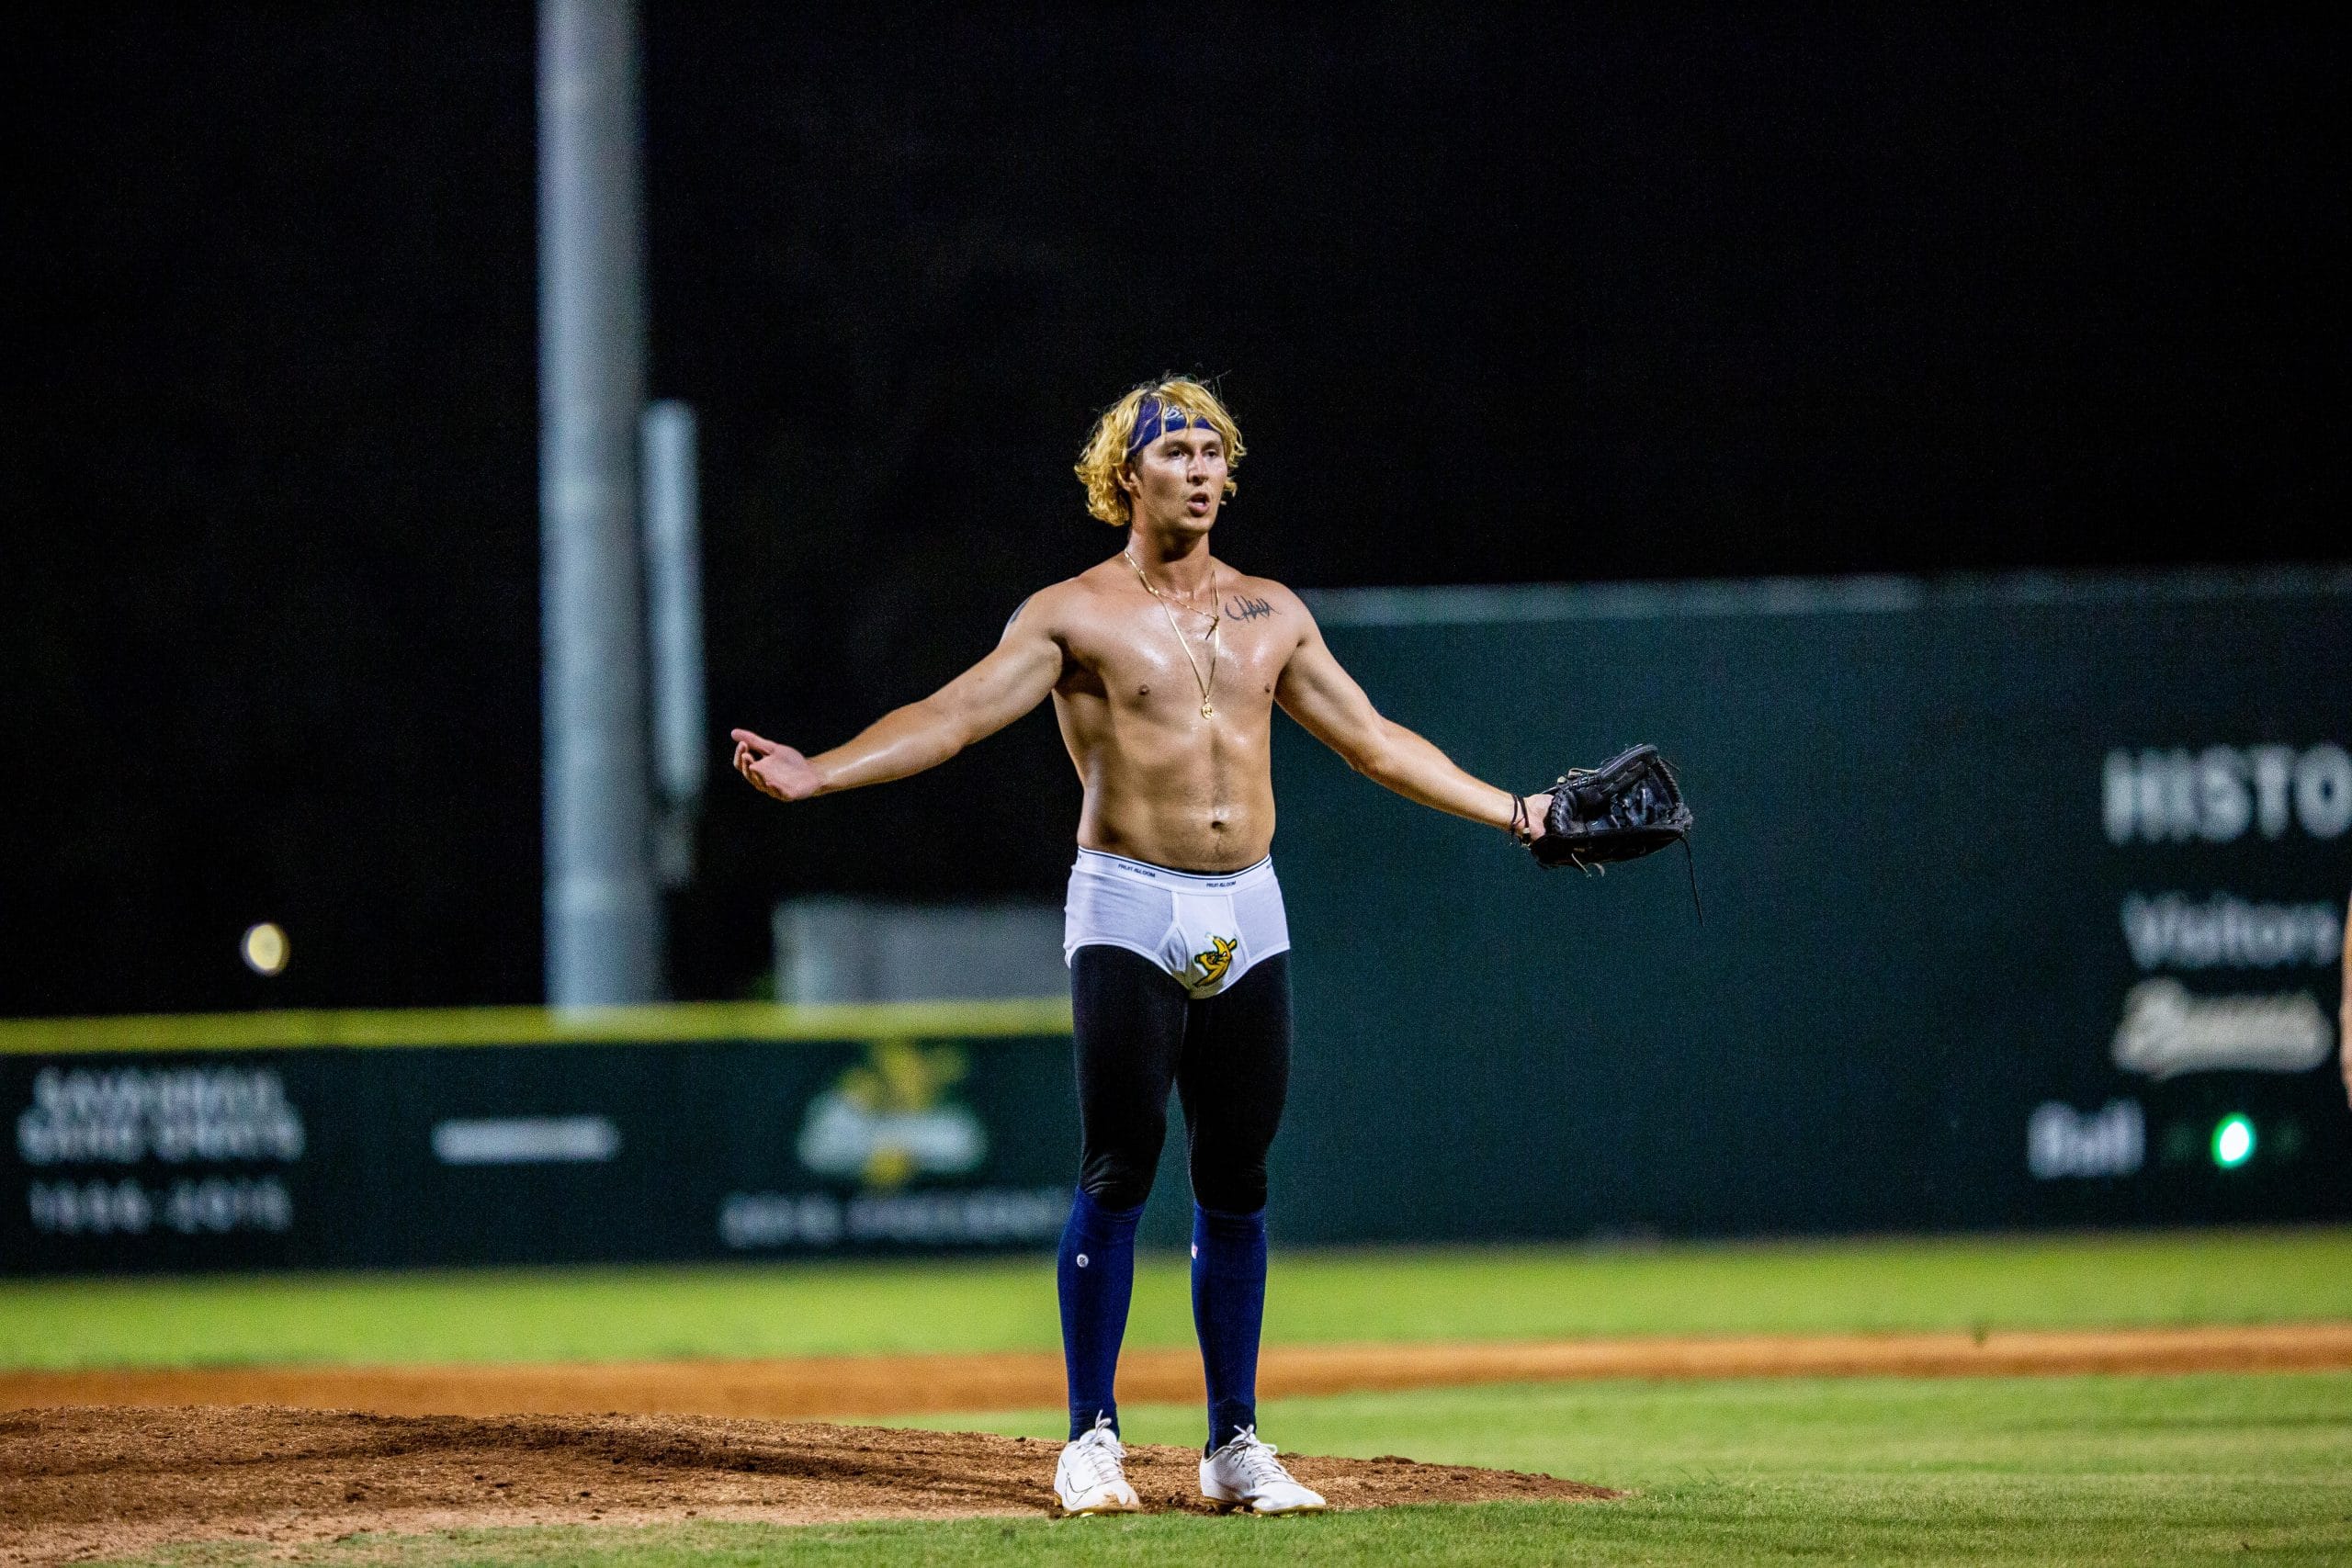 Baseball Player Pitches in his Underwear with Ric Flair Impression